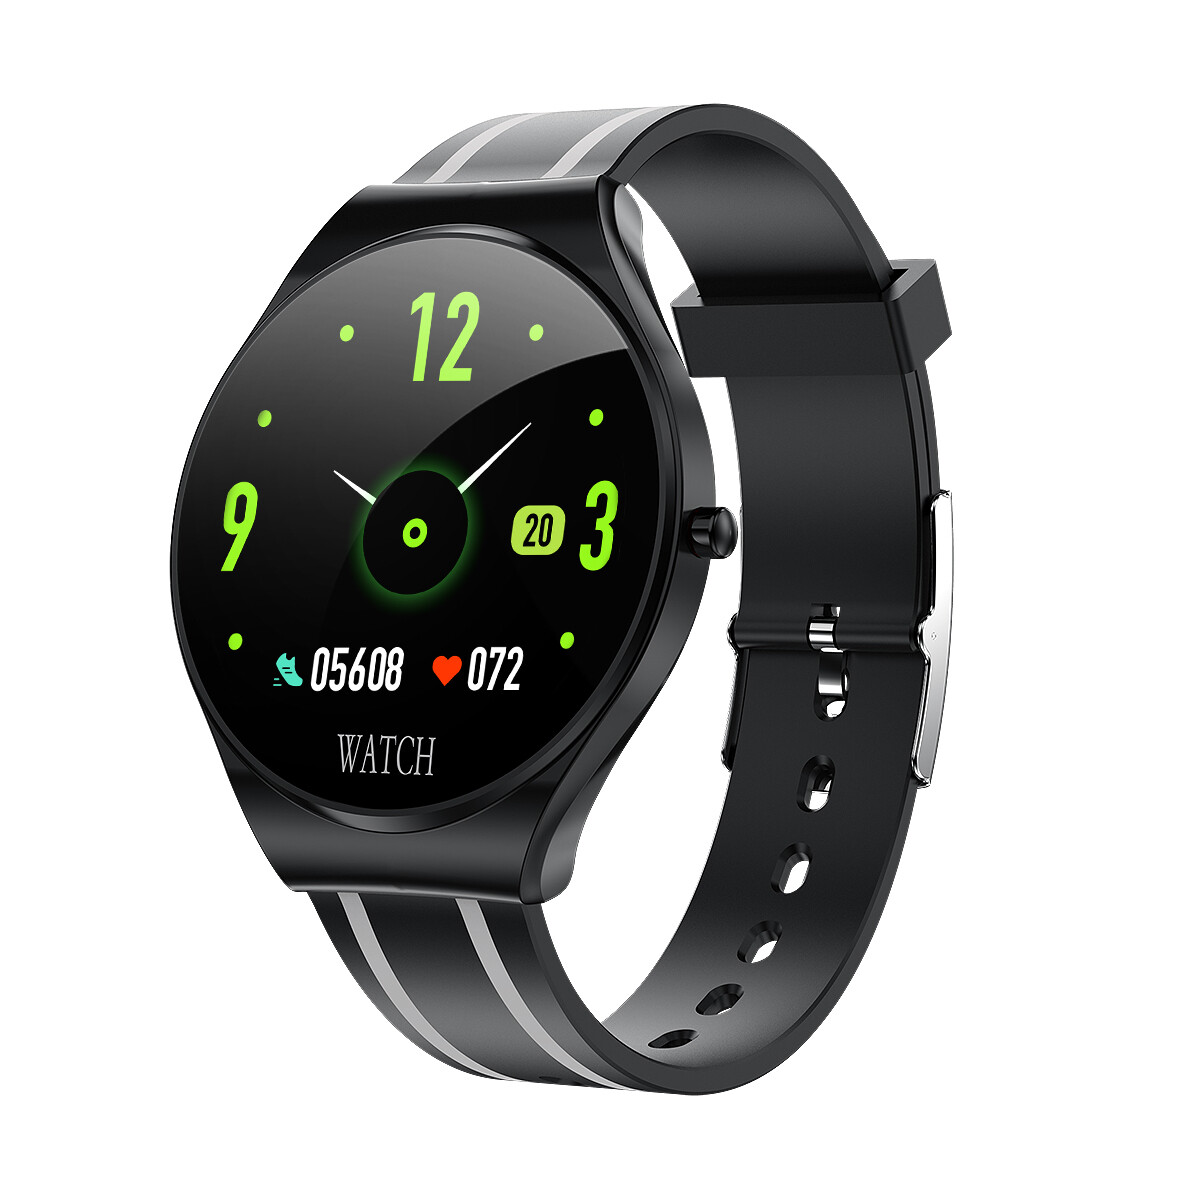 Sports Silicone Strap for Running Watch Waterproof Smartwatch